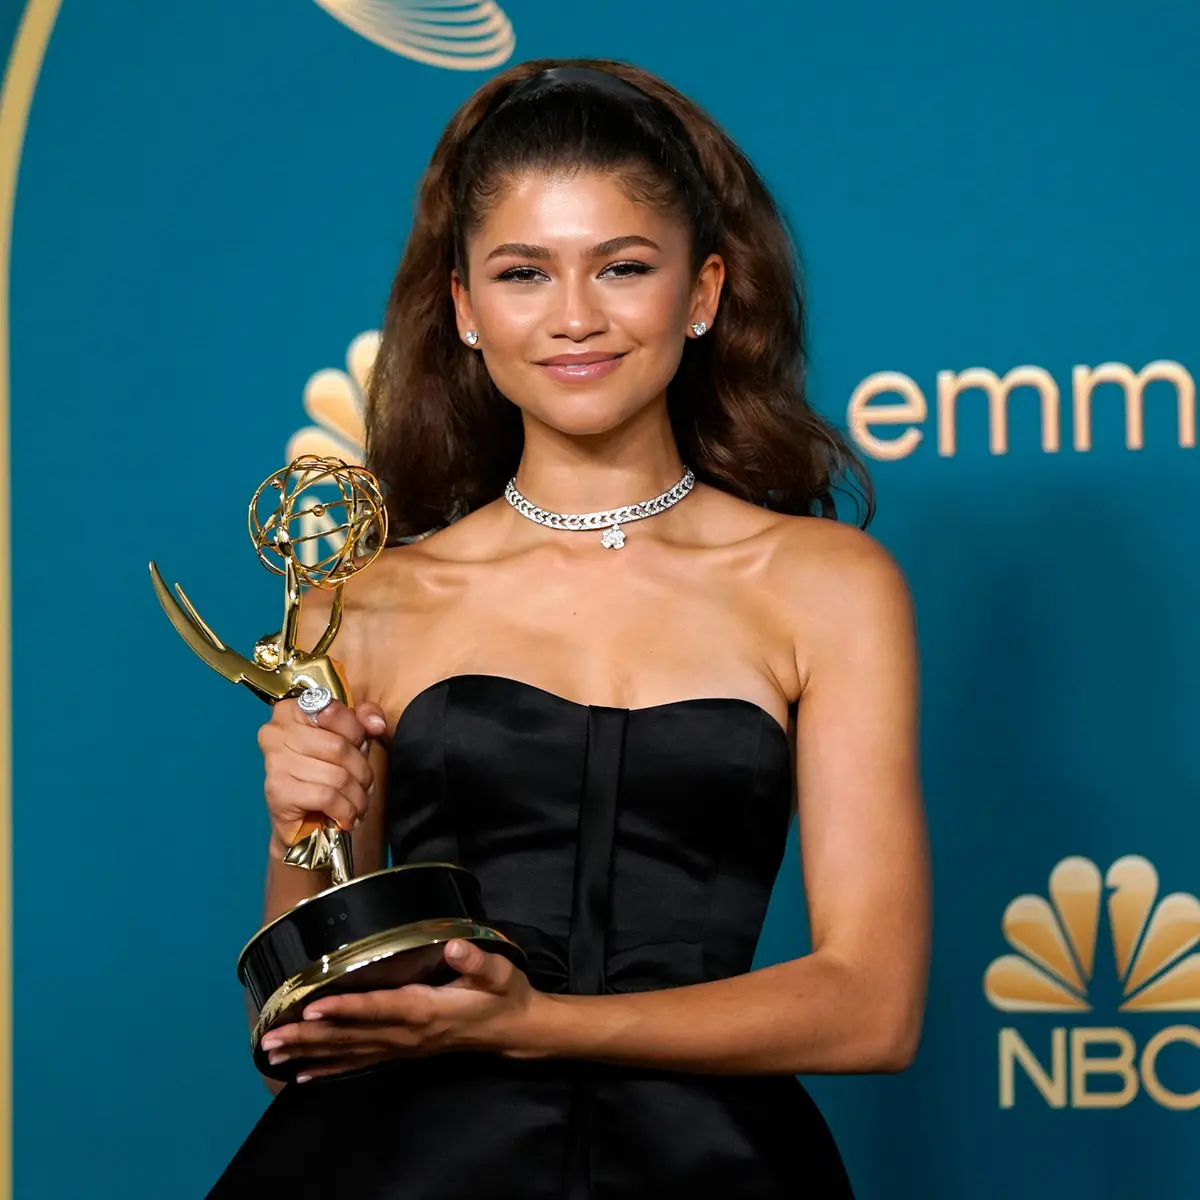 Why Wasn't Zendaya At the 2023 Golden Globes?